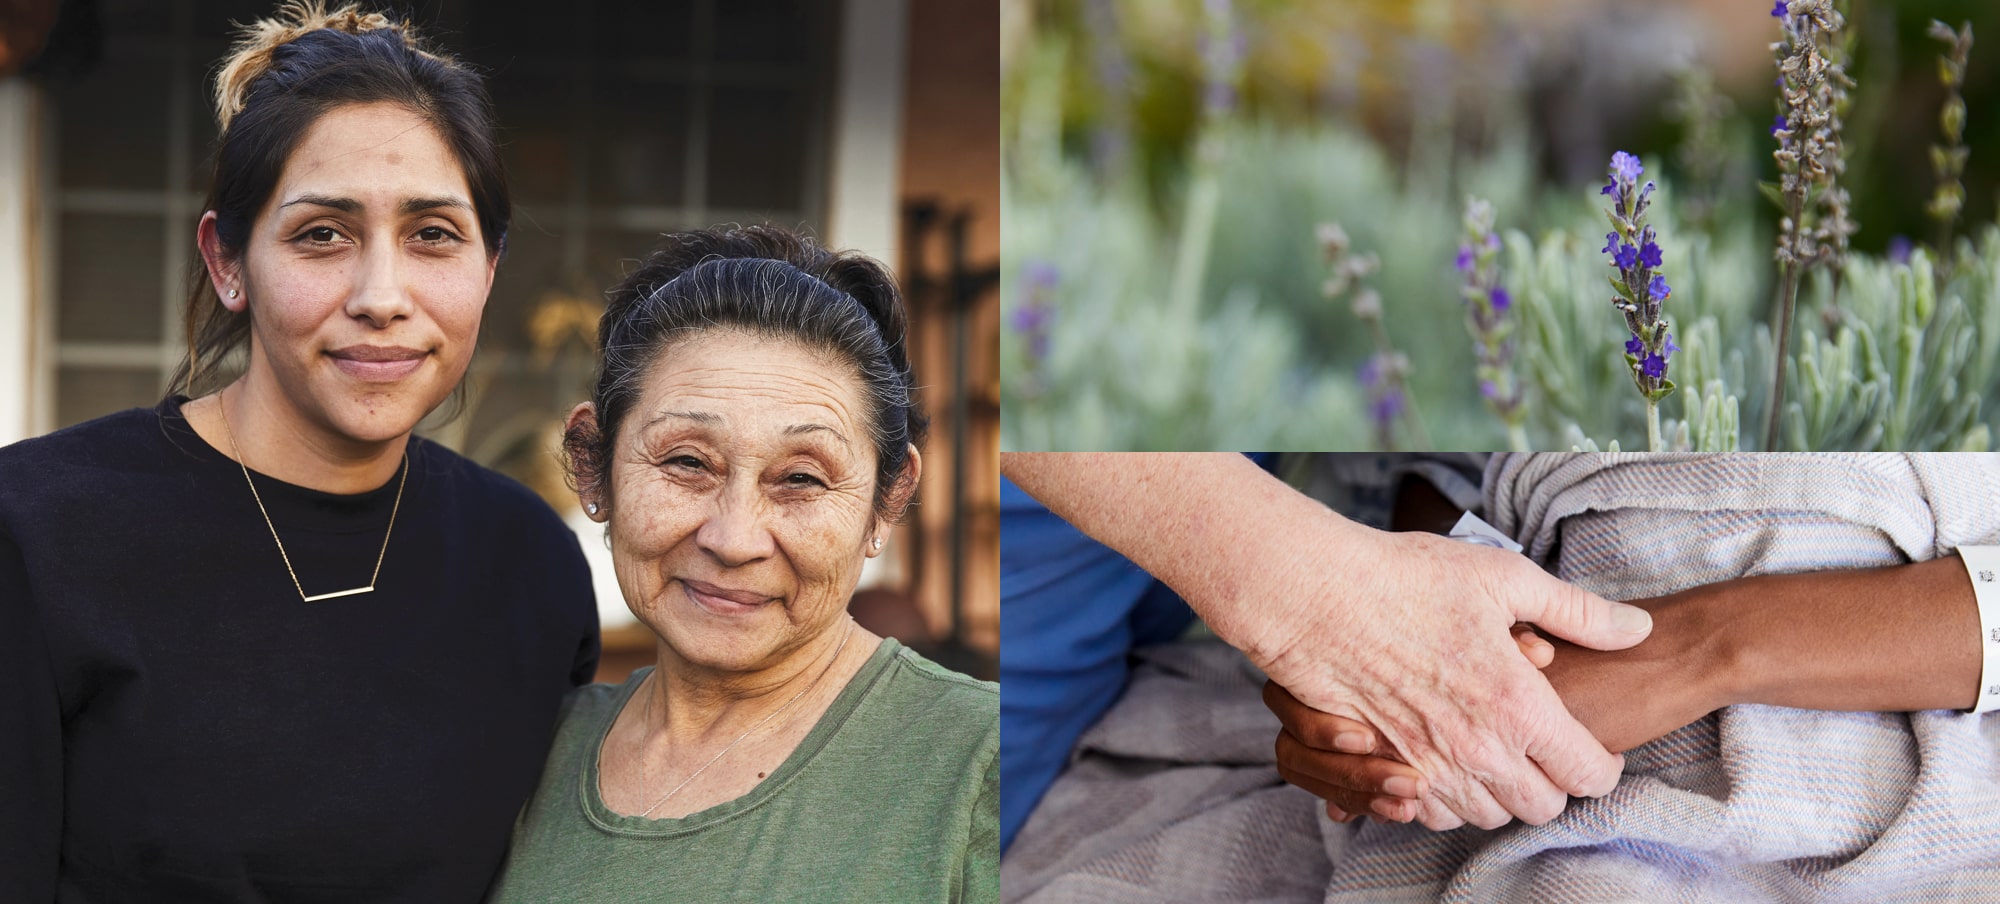 Collage of young Latina woman standing next to her mother, close up of lavender plants, close up of a white hand holding a Black hand